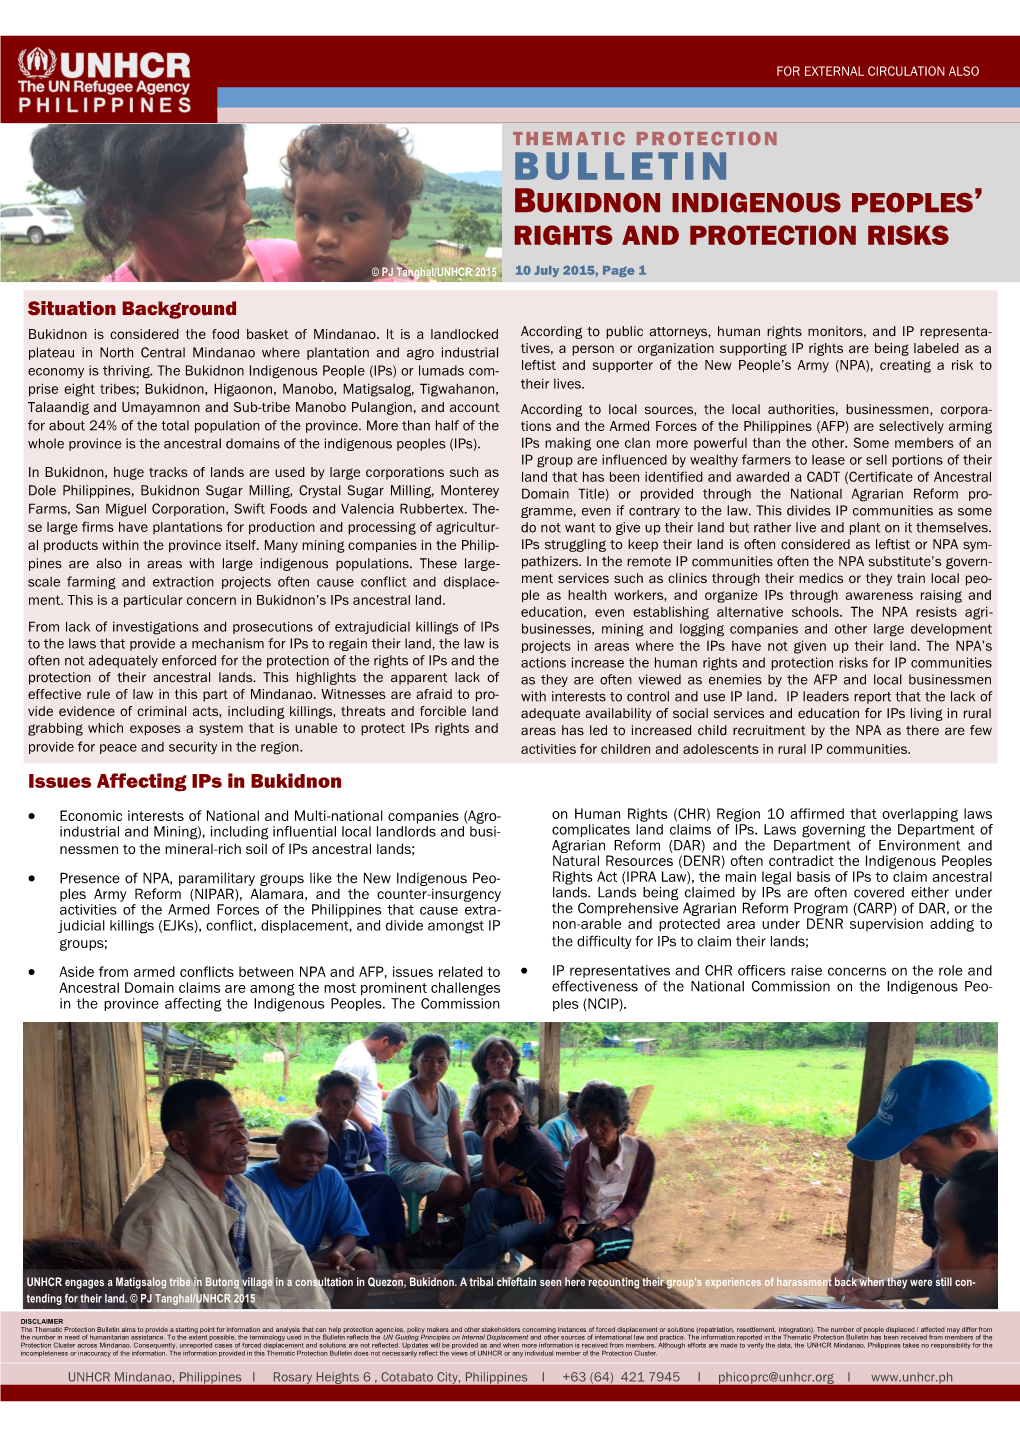 Bulletin Bukidnon Indigenous Peoples’ Rights and Protection Risks